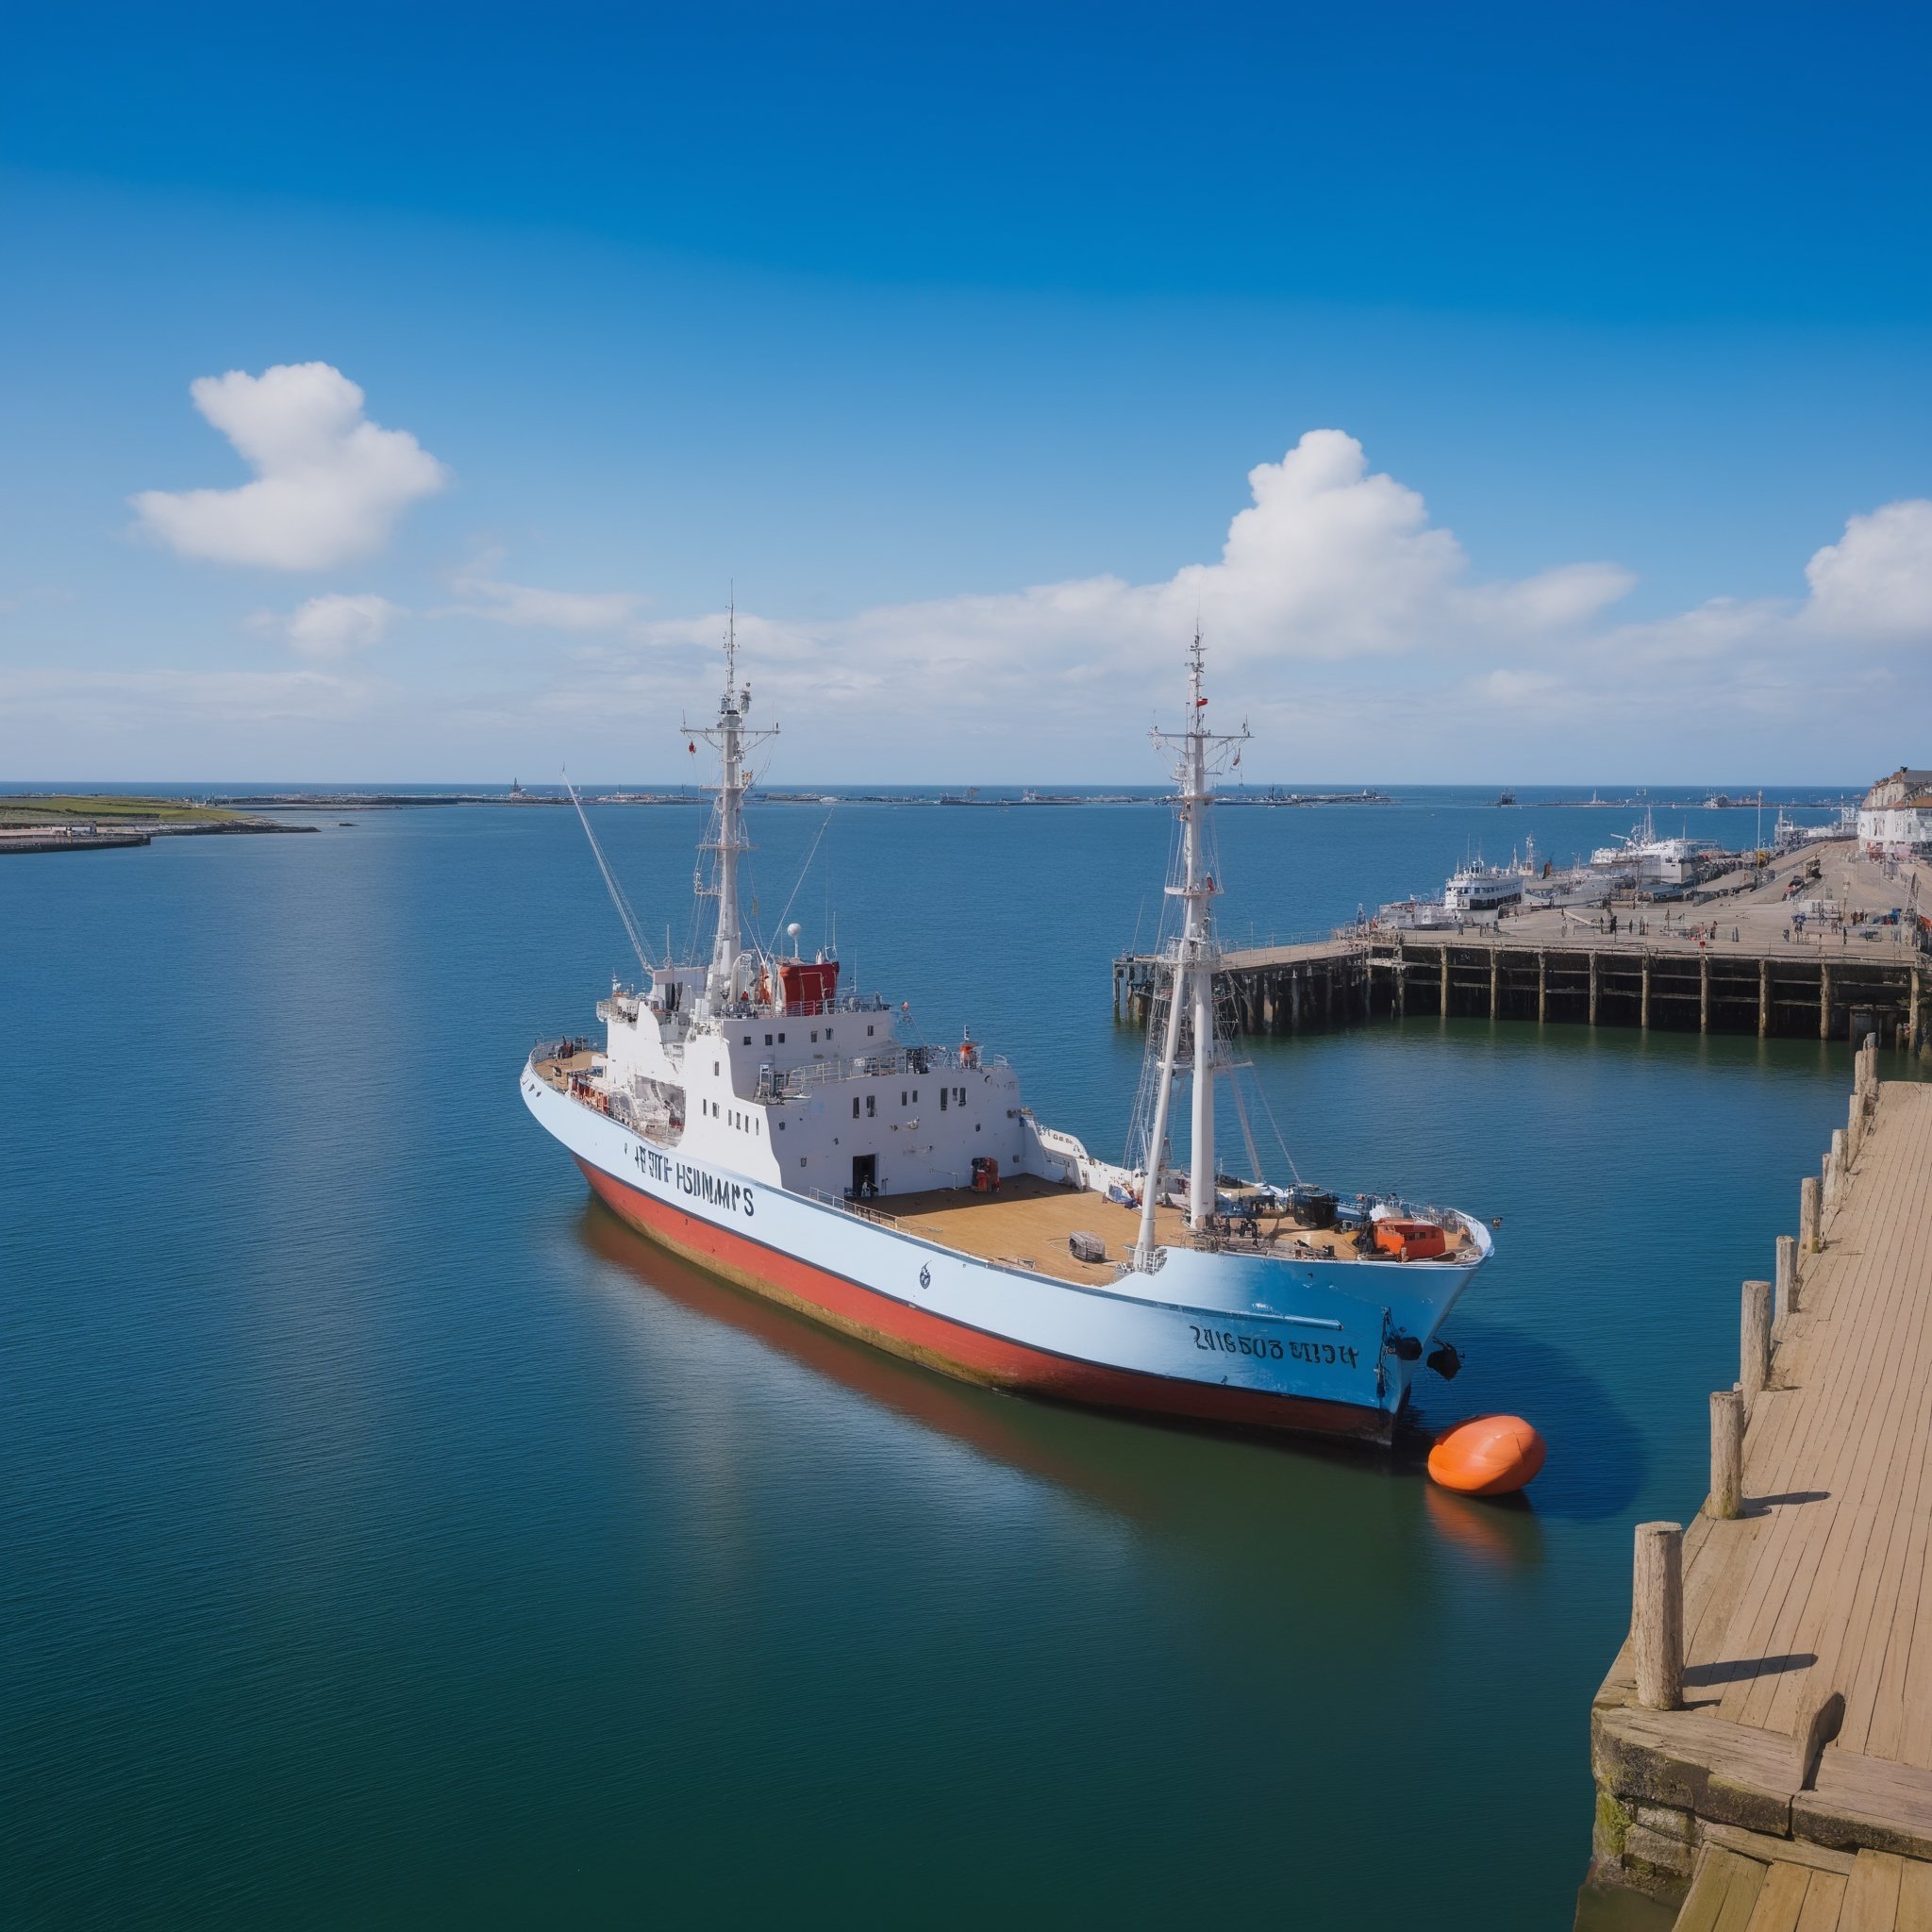 outdoors, sky, day, cloud, water, english text, blue sky, no humans, ocean, watercraft, ship, boat, warship, pier, dock, a fishing boat docked at a pier.